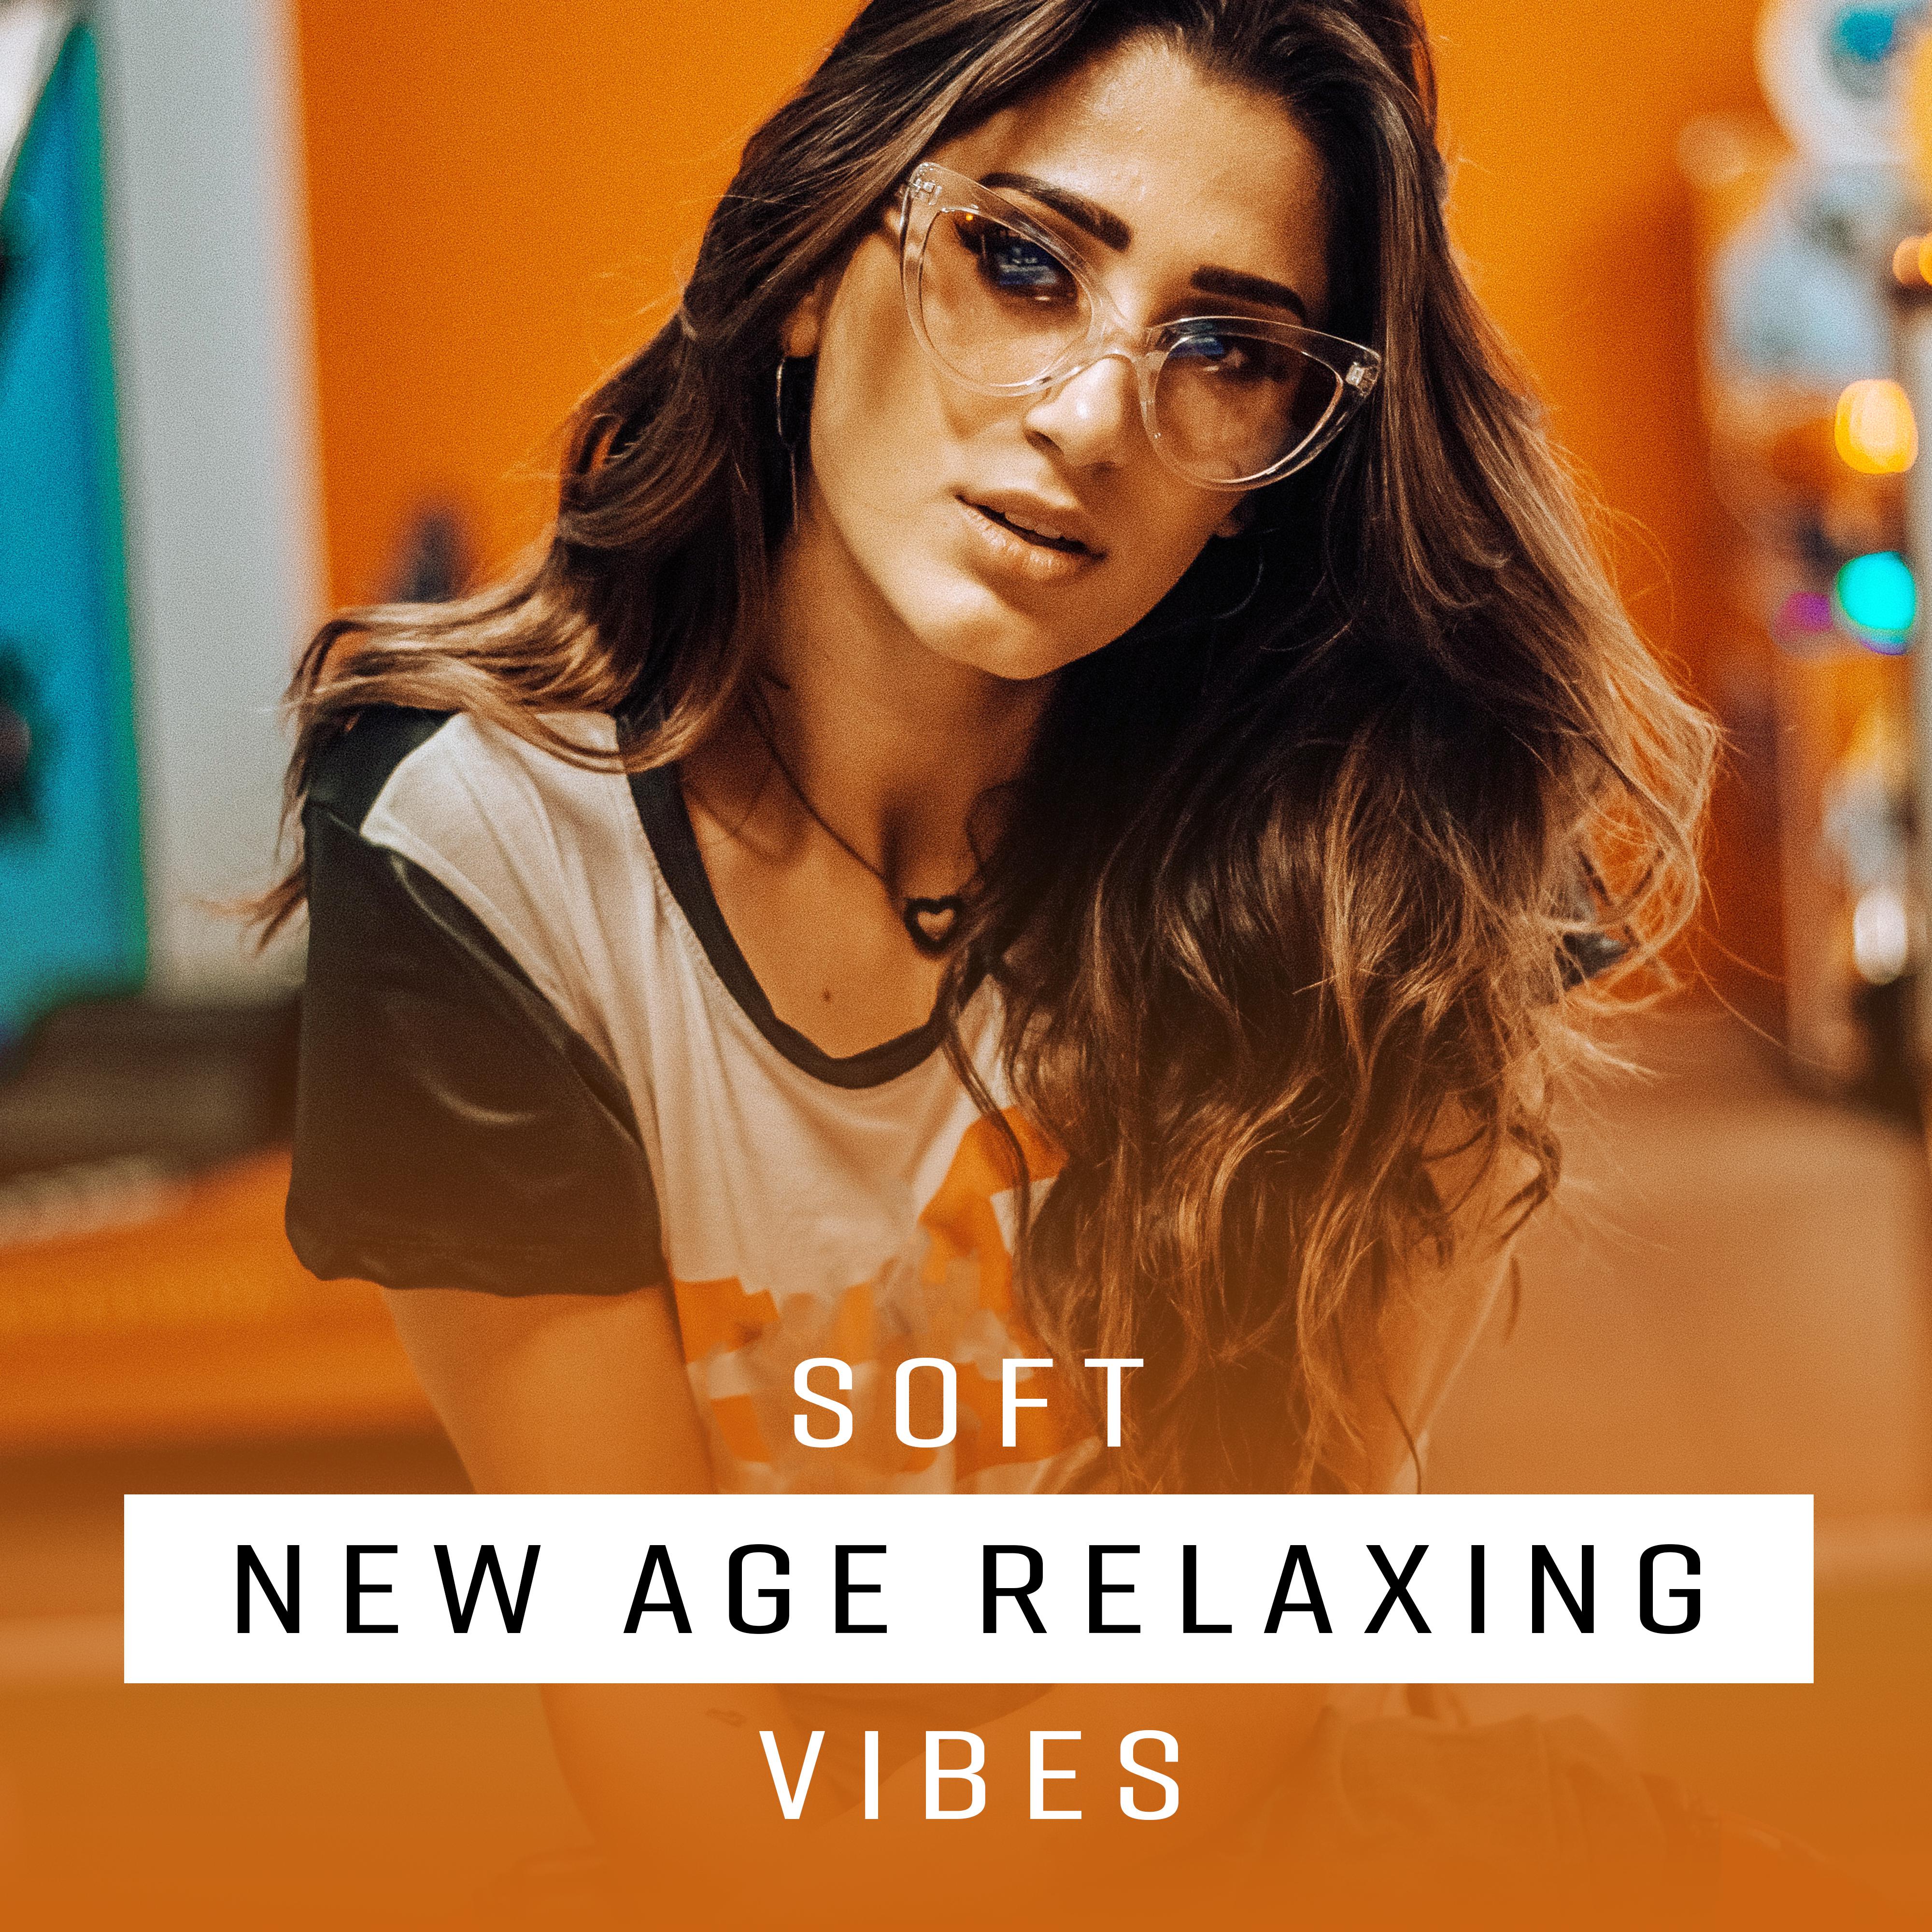 Soft New Age Relaxing Vibes